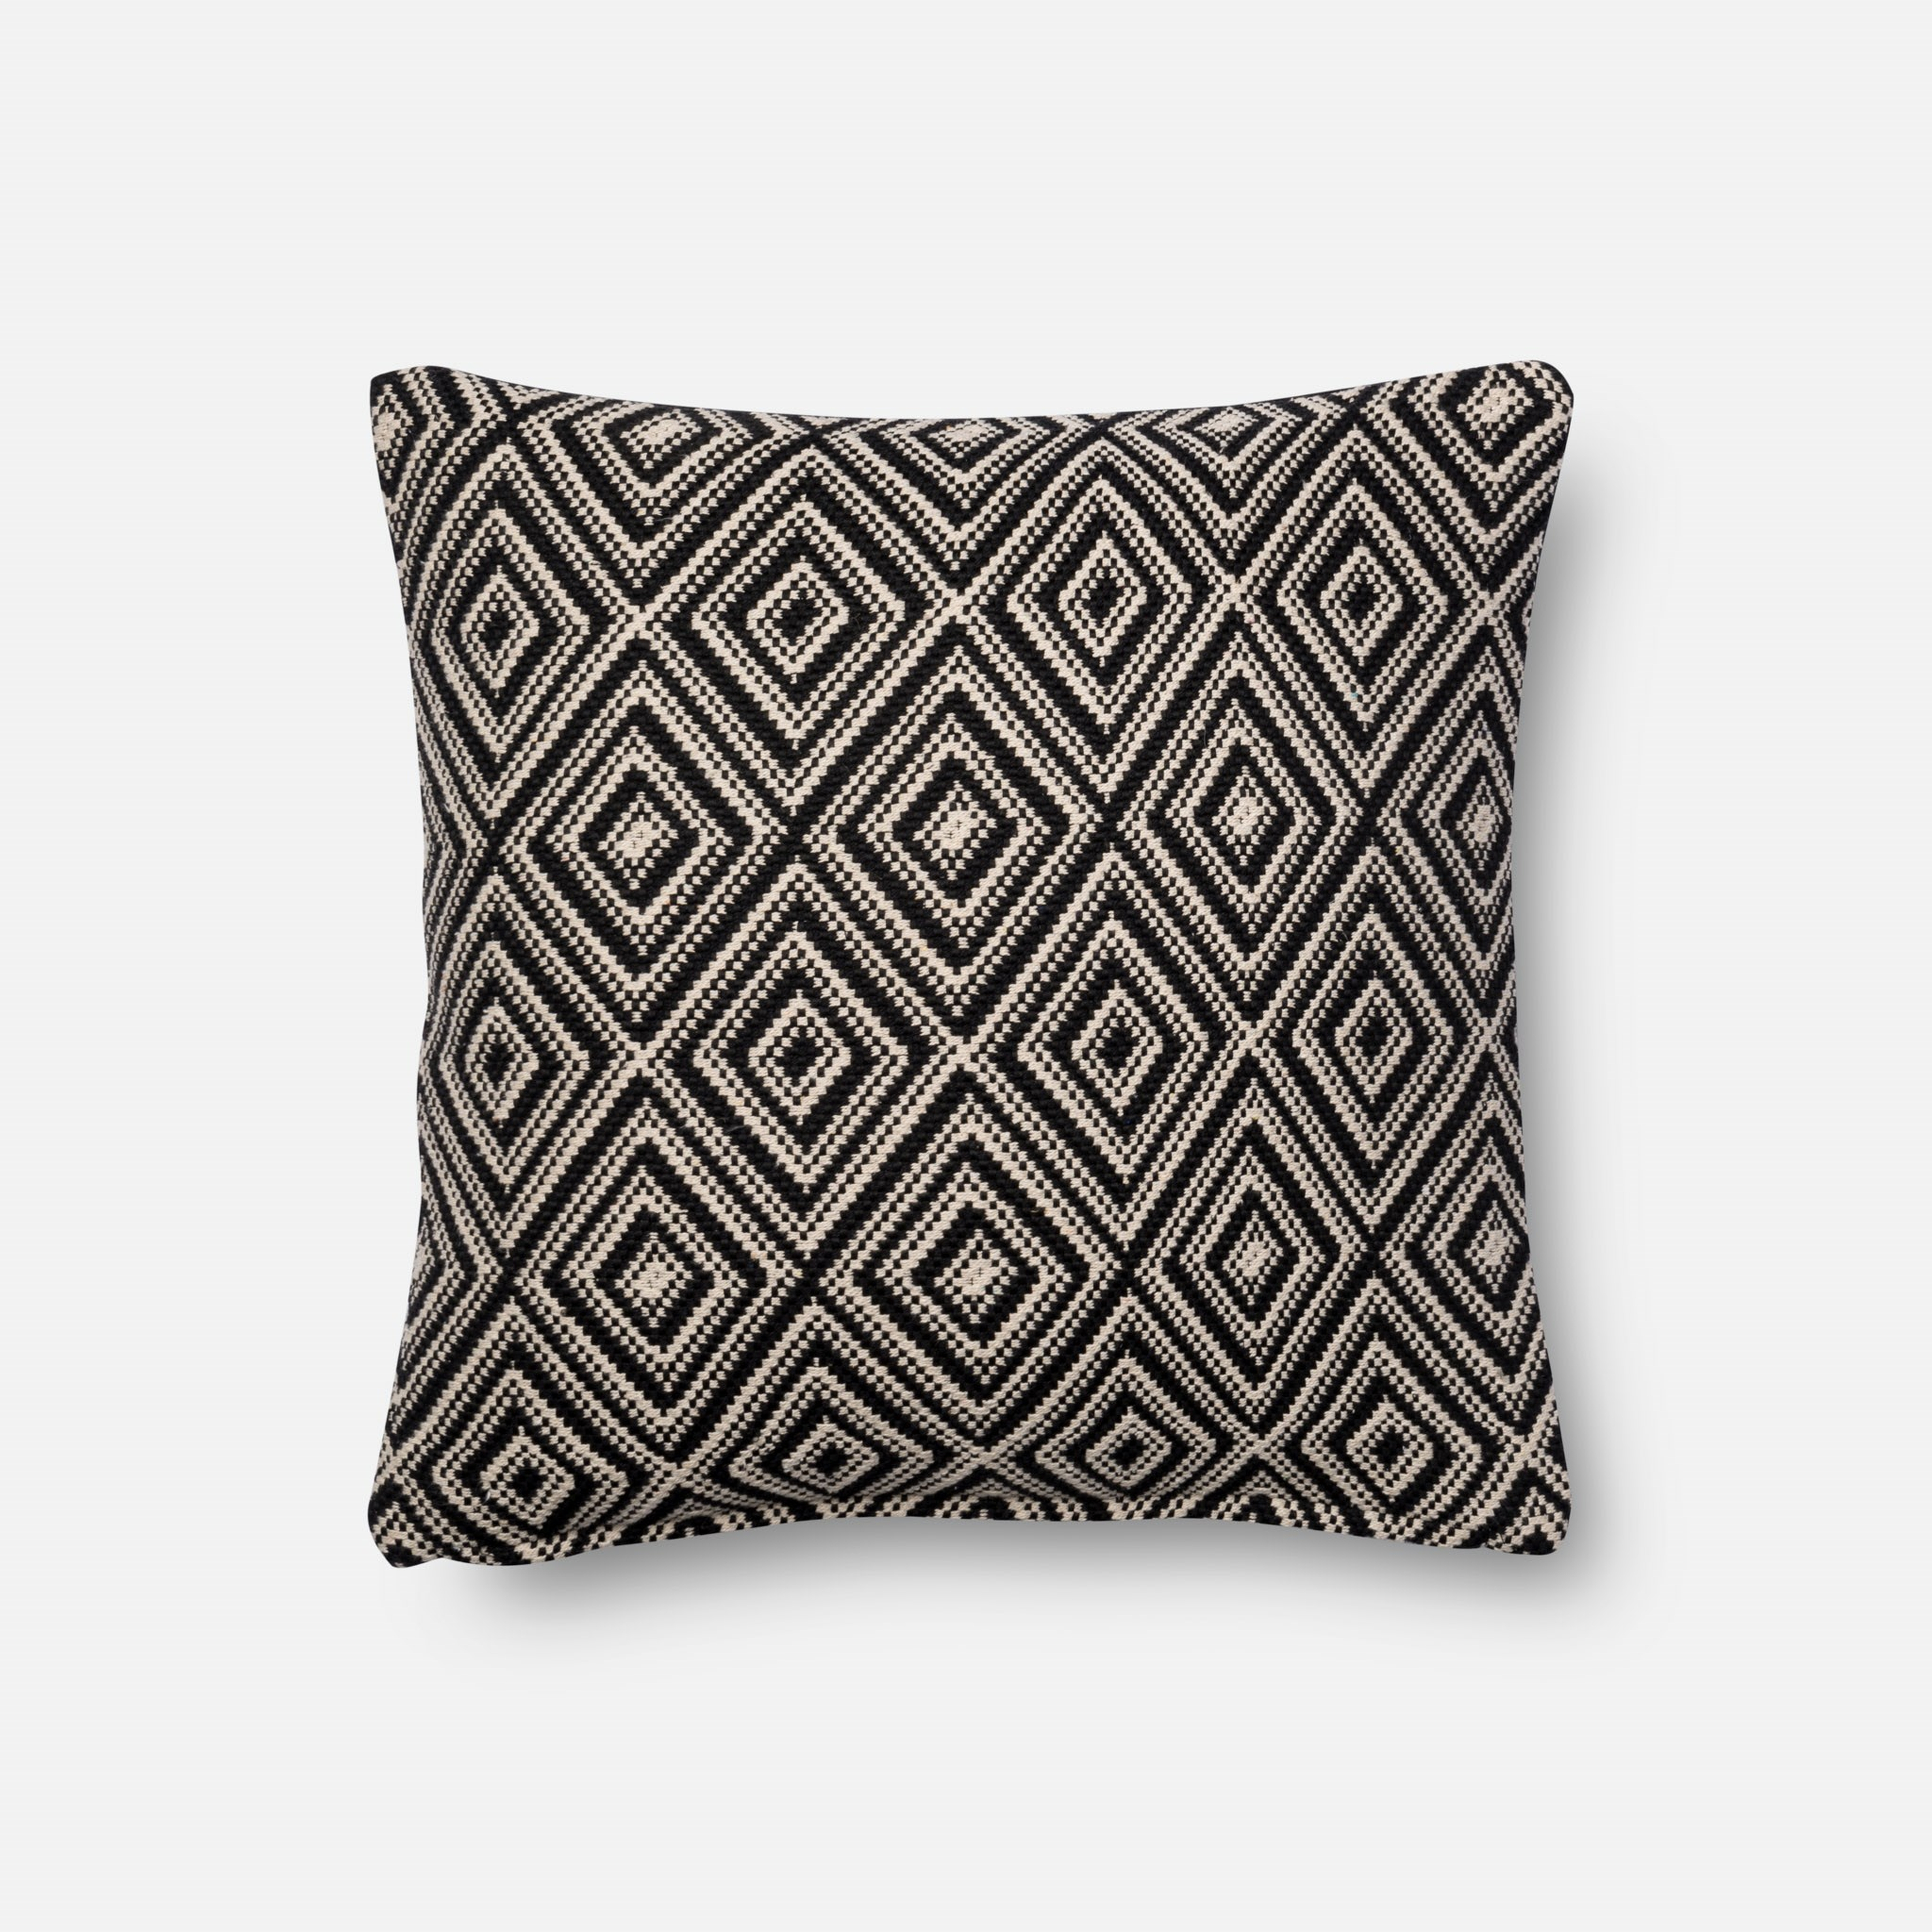 DSET Pillow BLACK / WHITE 18" X 18" Cover w/Down - Magnolia Home by Joana Gaines Crafted by Loloi Rugs